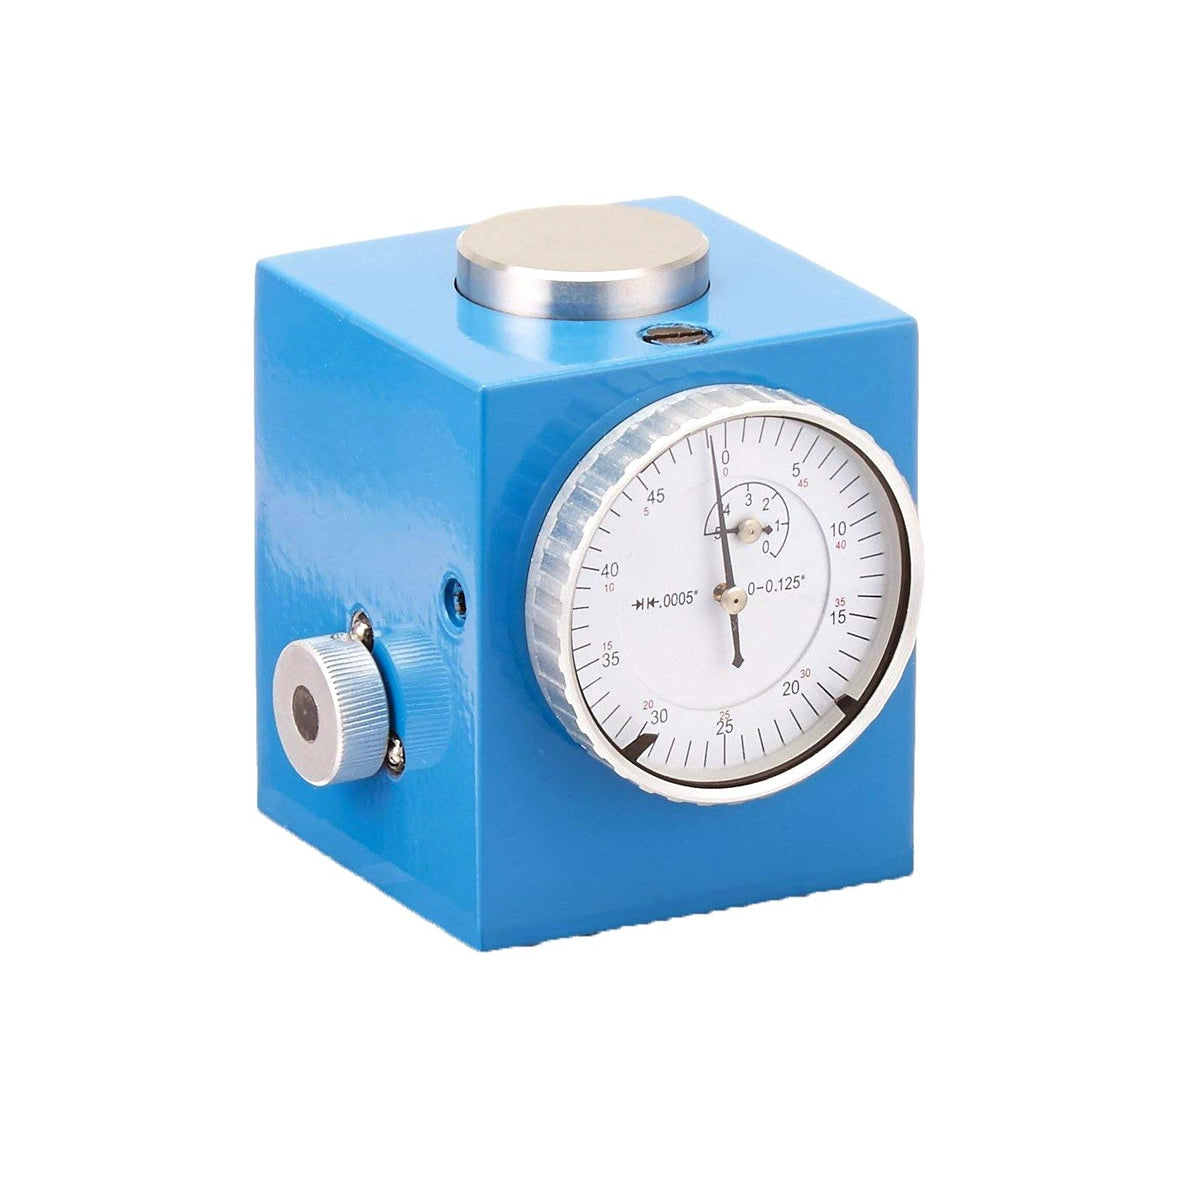 Z-AXIS SETTING INDICATOR WITH .0005 READING .125" TRAVEL